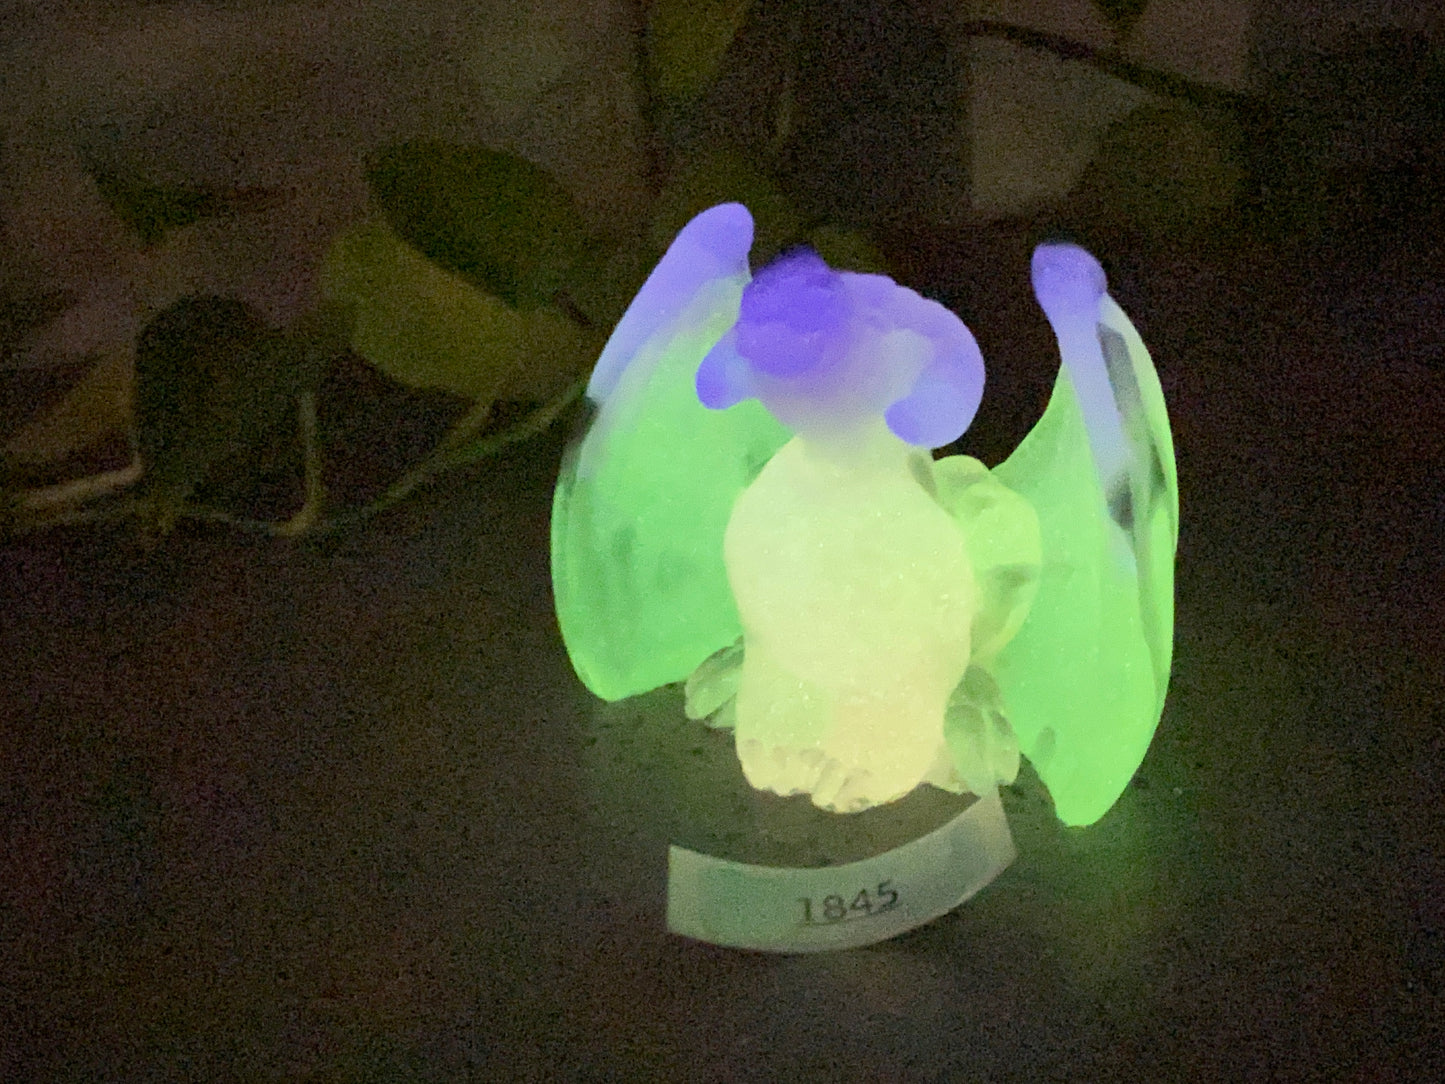 a green and blue light up object on a table